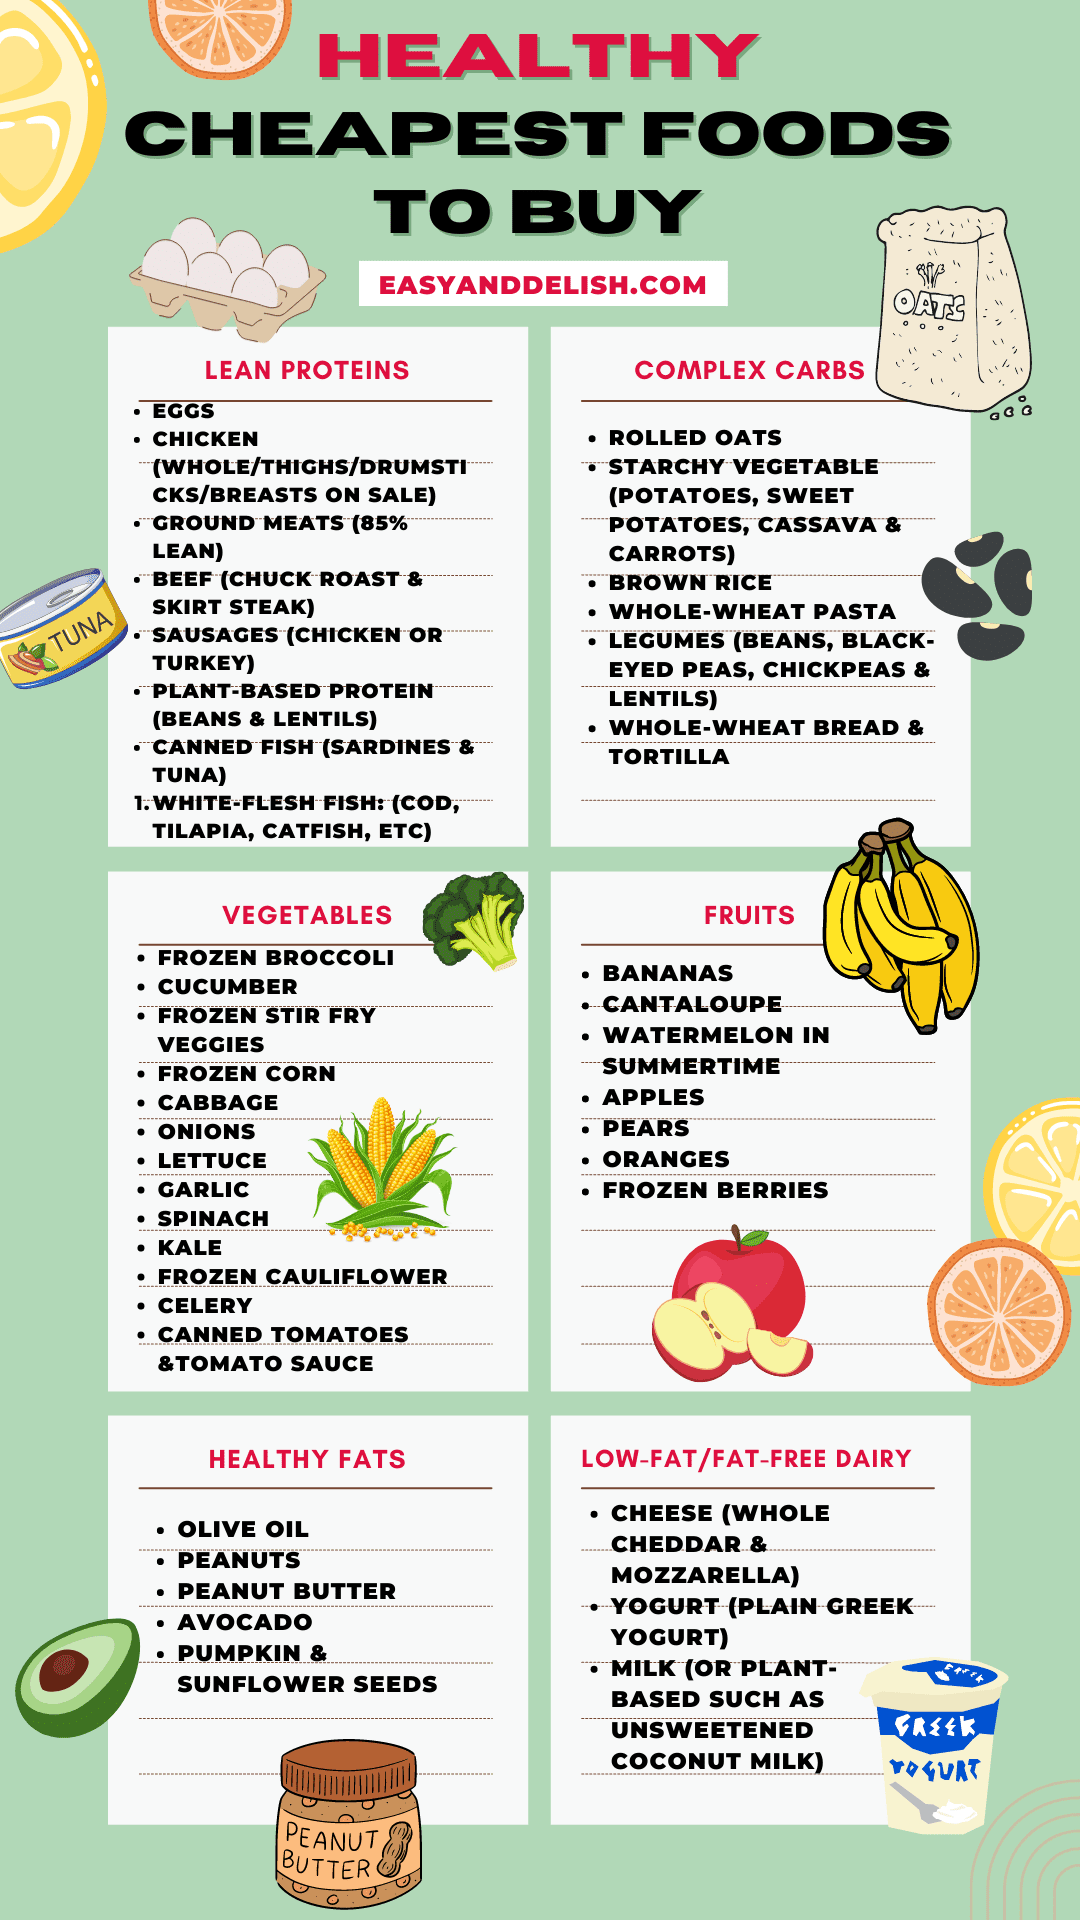 Budget-friendly groceries